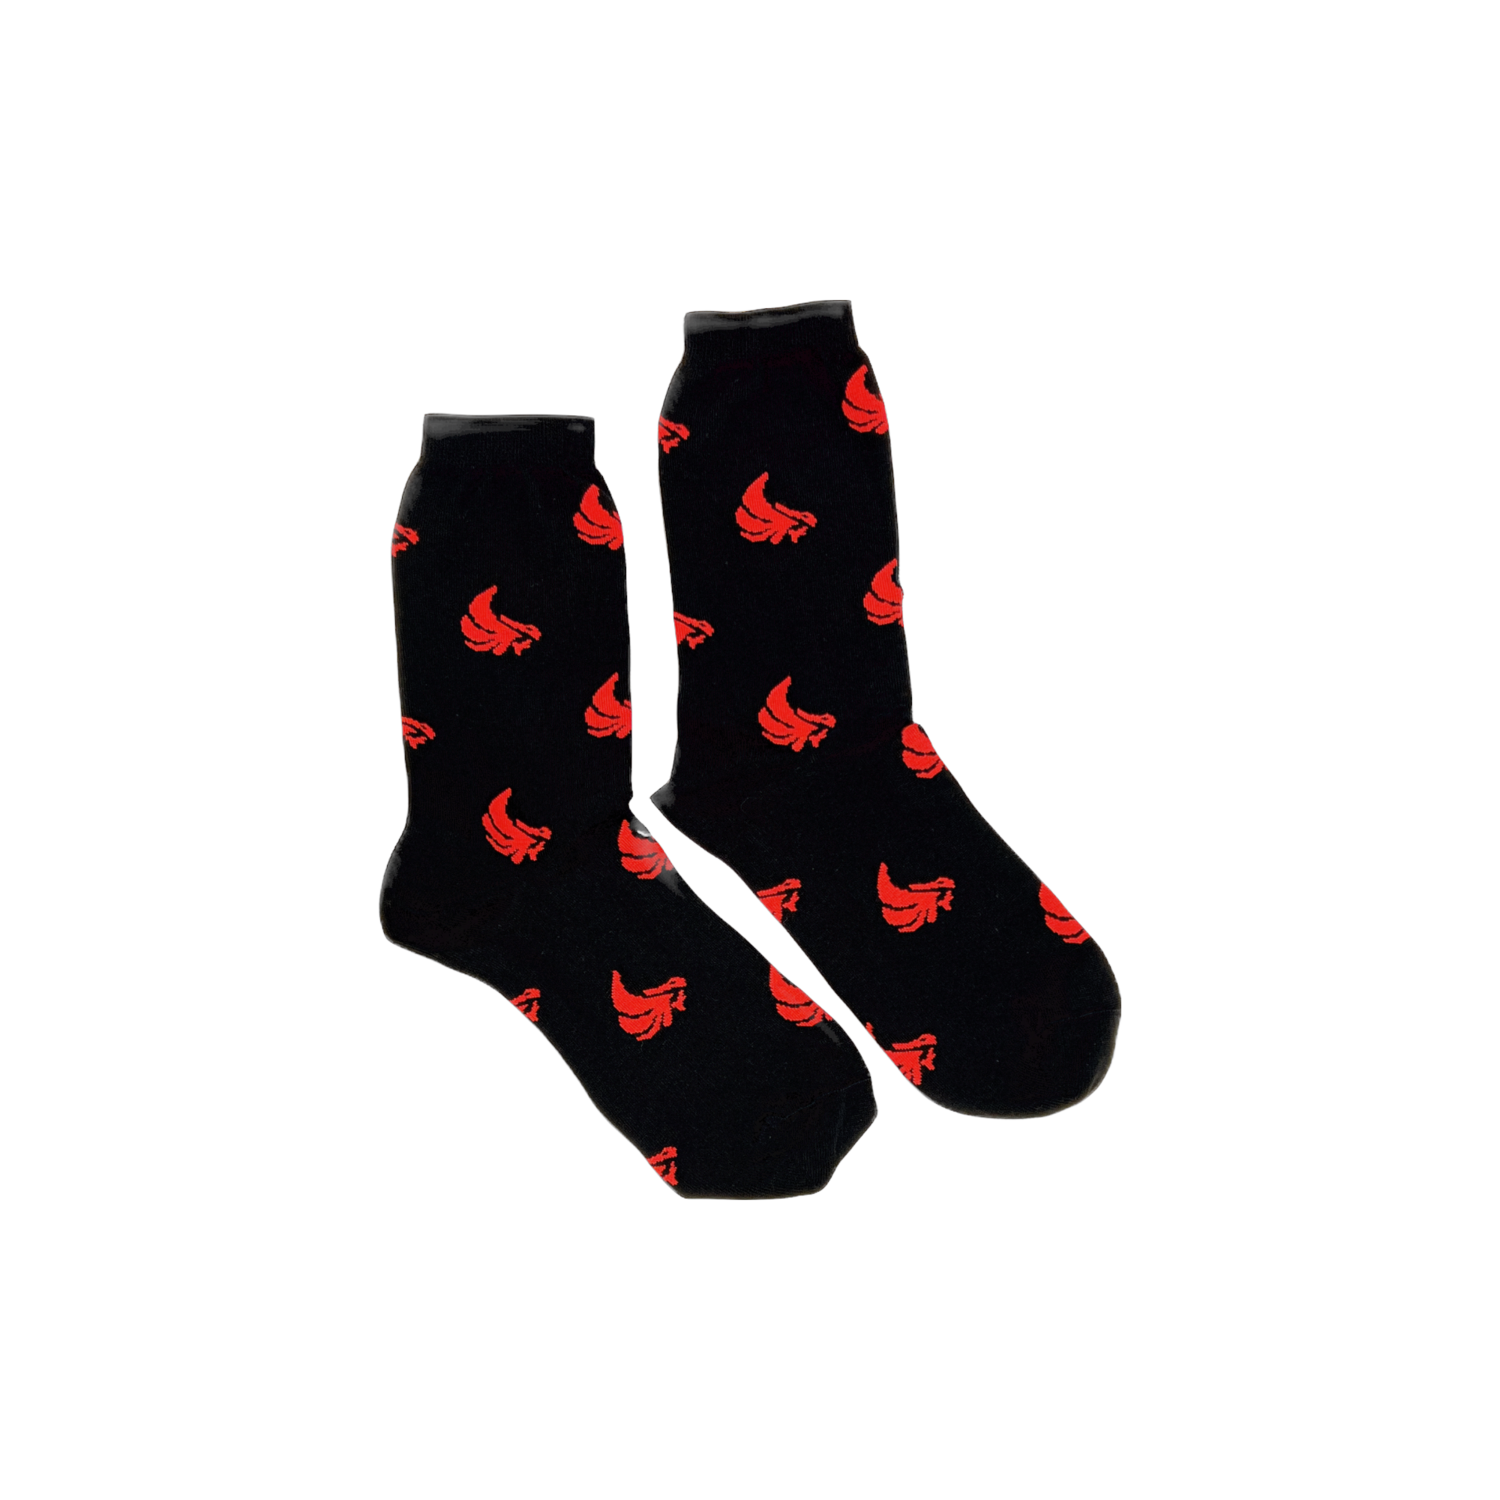 RED ICON - BLACK SOCKS, SIZE: YOUTH